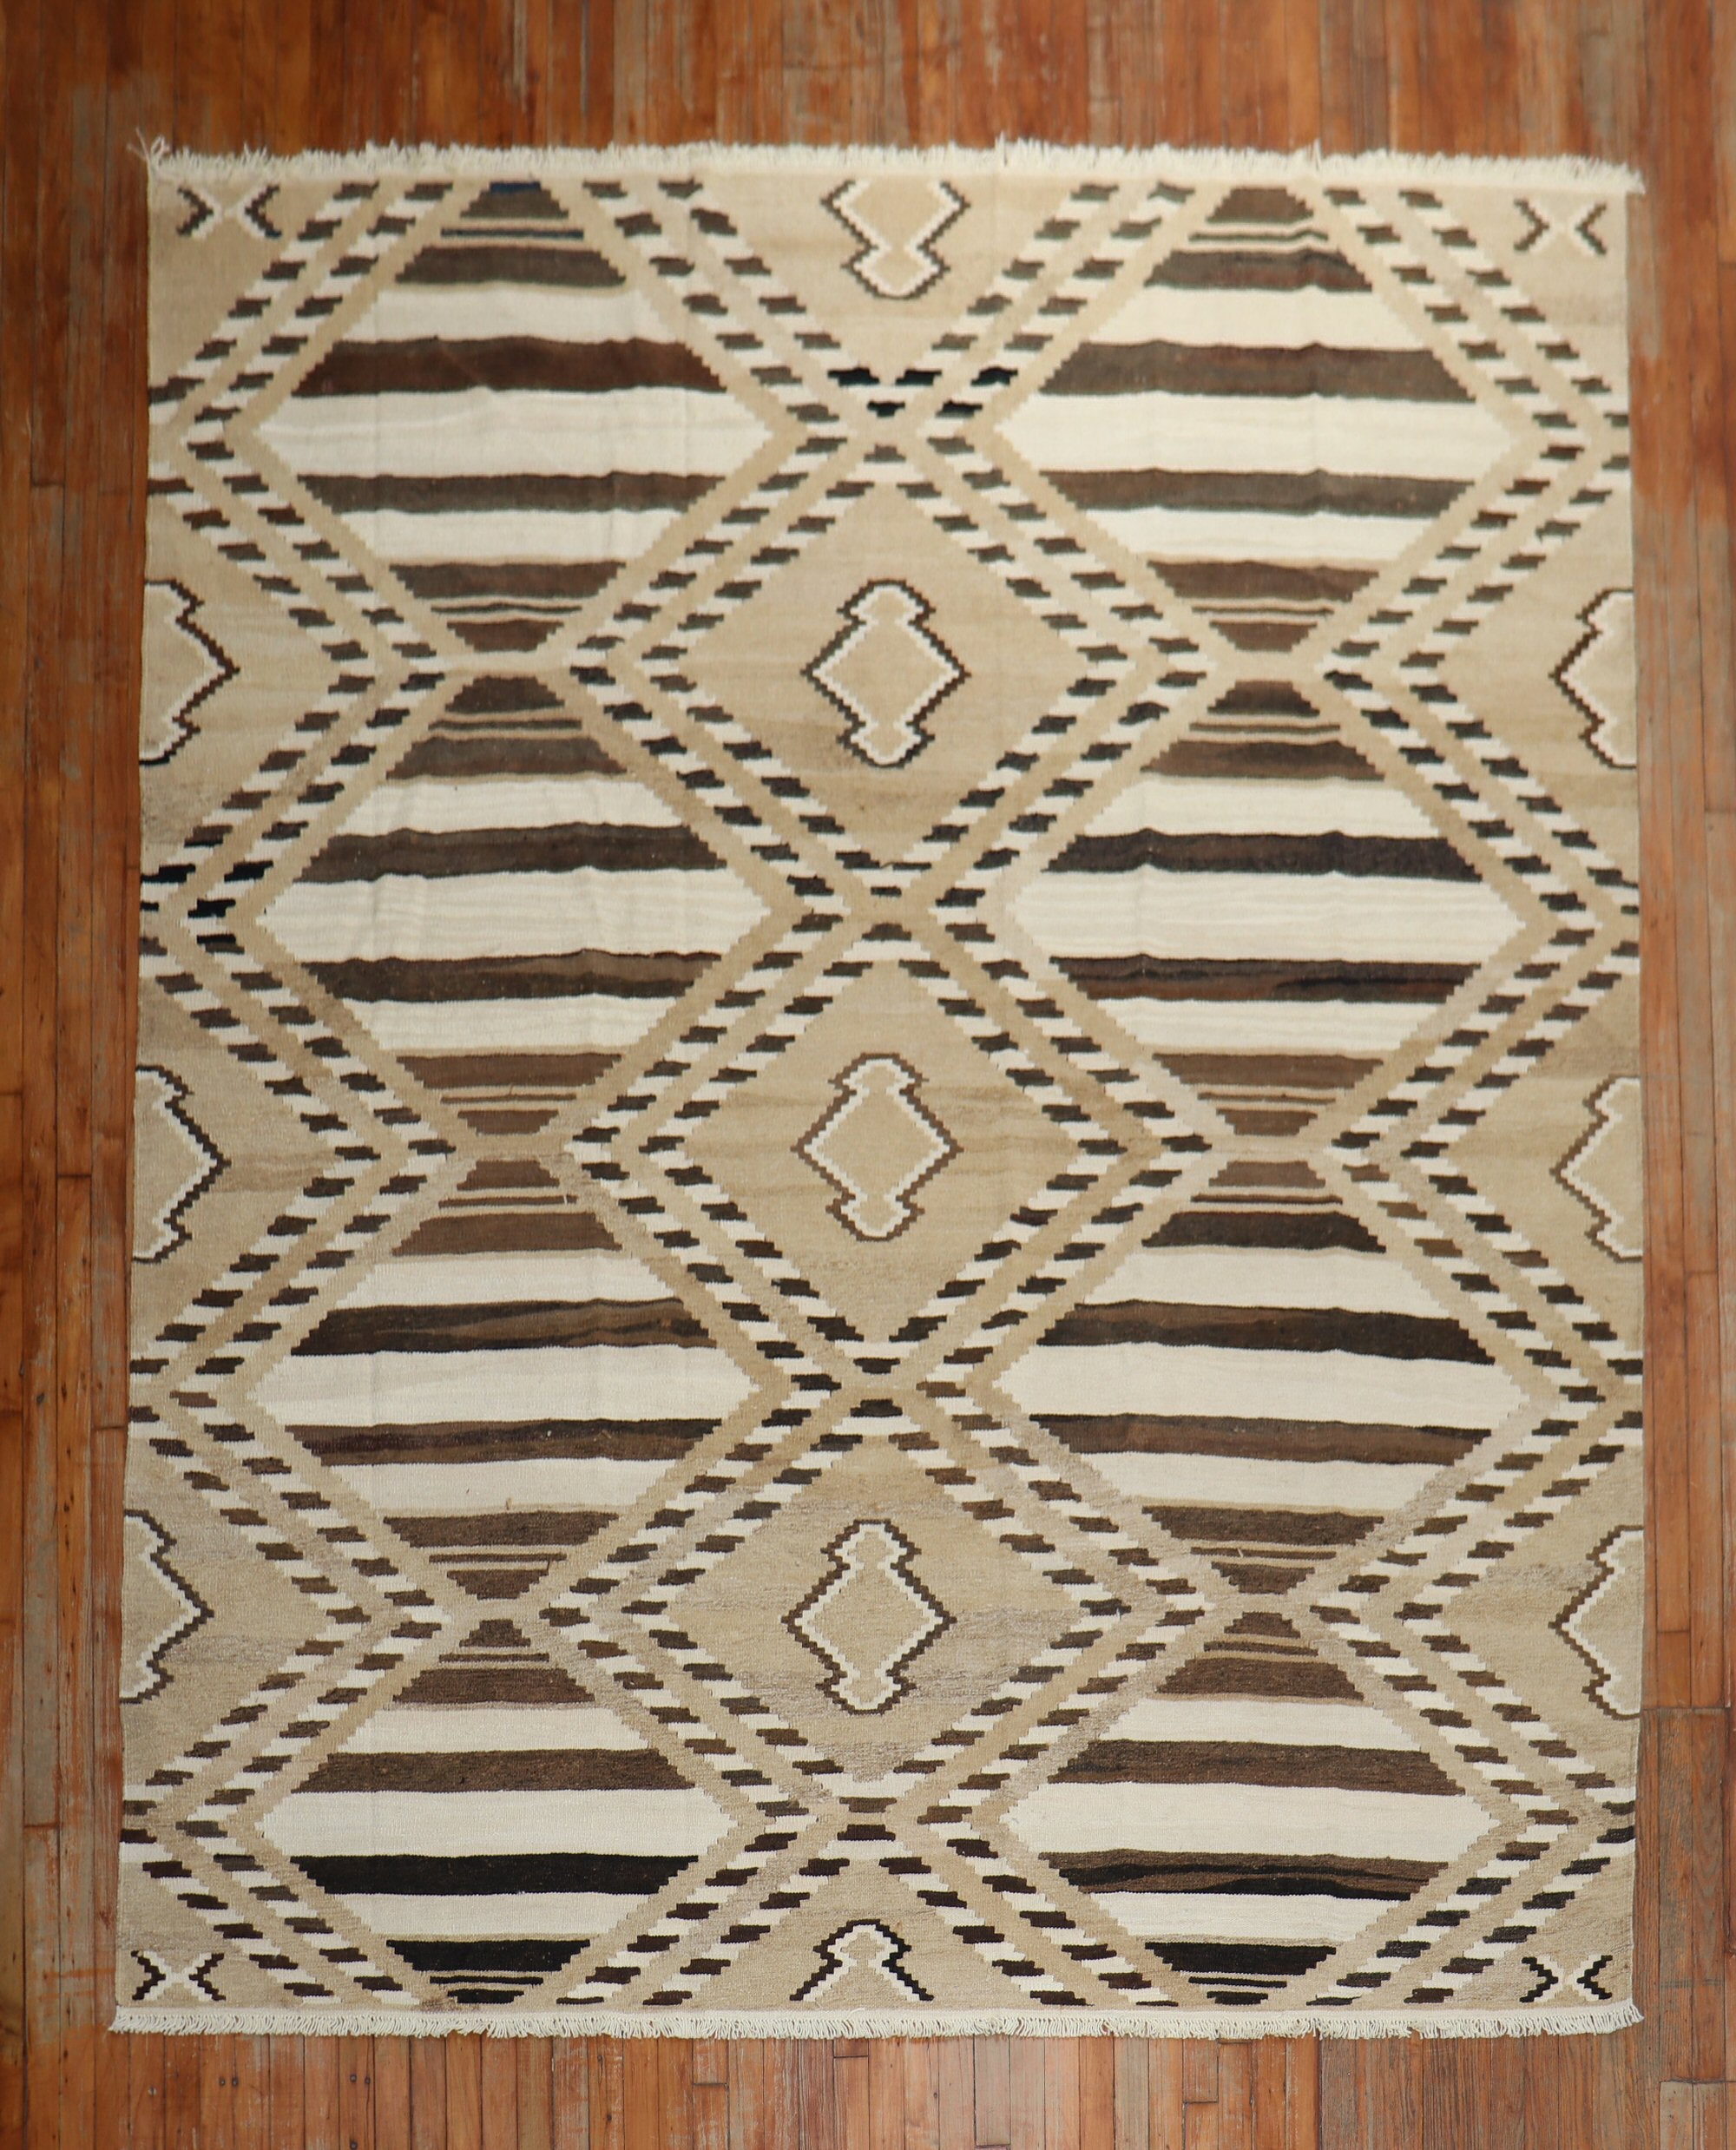 Late 20th-century geometric kilim in brown, ivory and camel tones.

Measures: 8'3'' x 10'7''